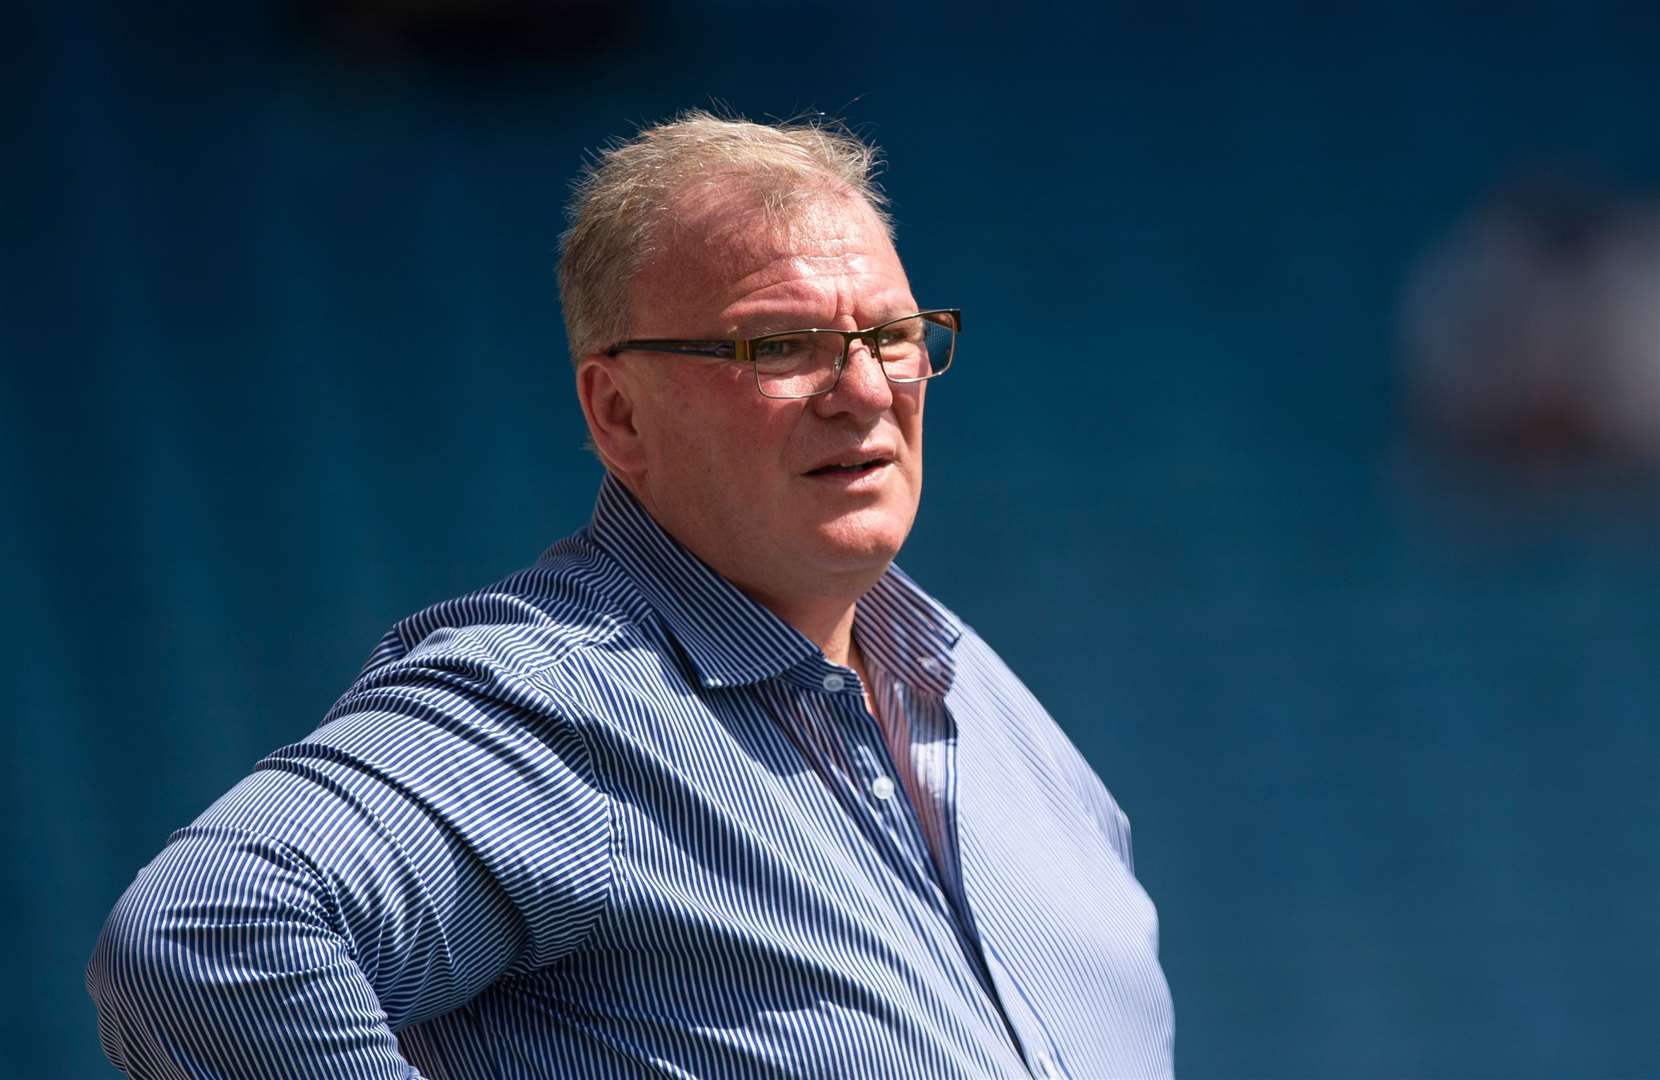 Gillingham boss Steve Evans included newest signing Alex Jakubiak in the team to face Southend